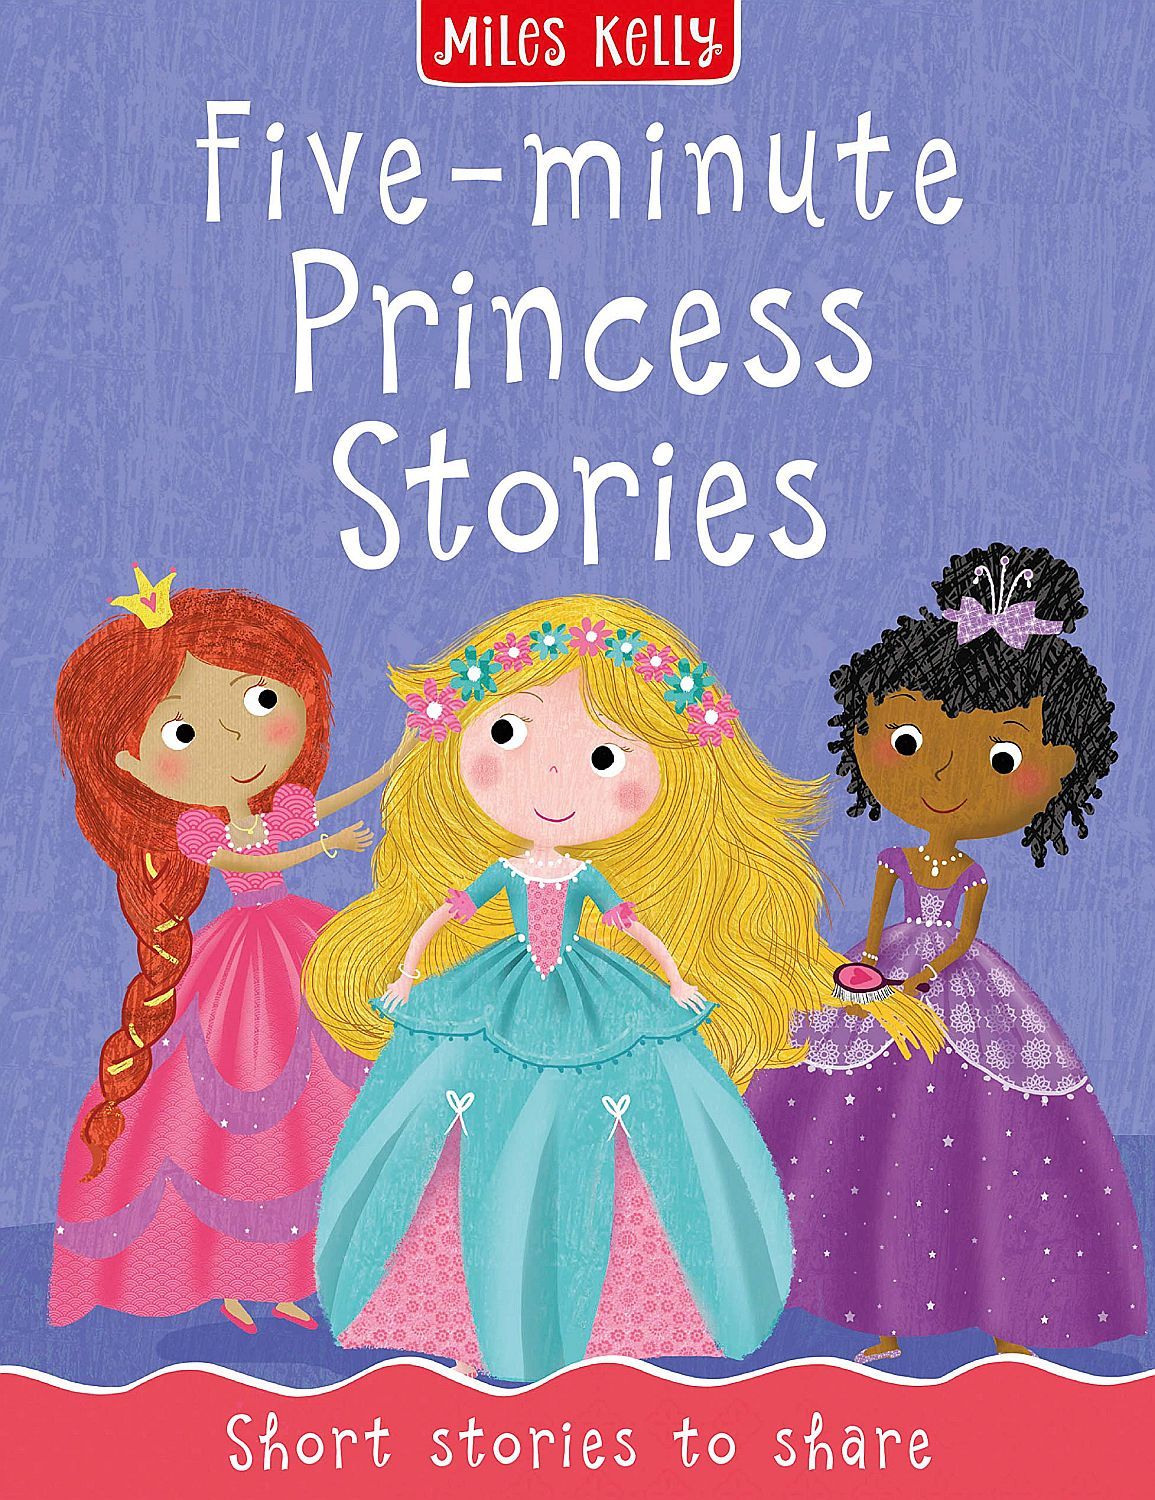 Five Minute Princess Stories Short Stories To Share Miles Kelly Various Цена Ozonebg